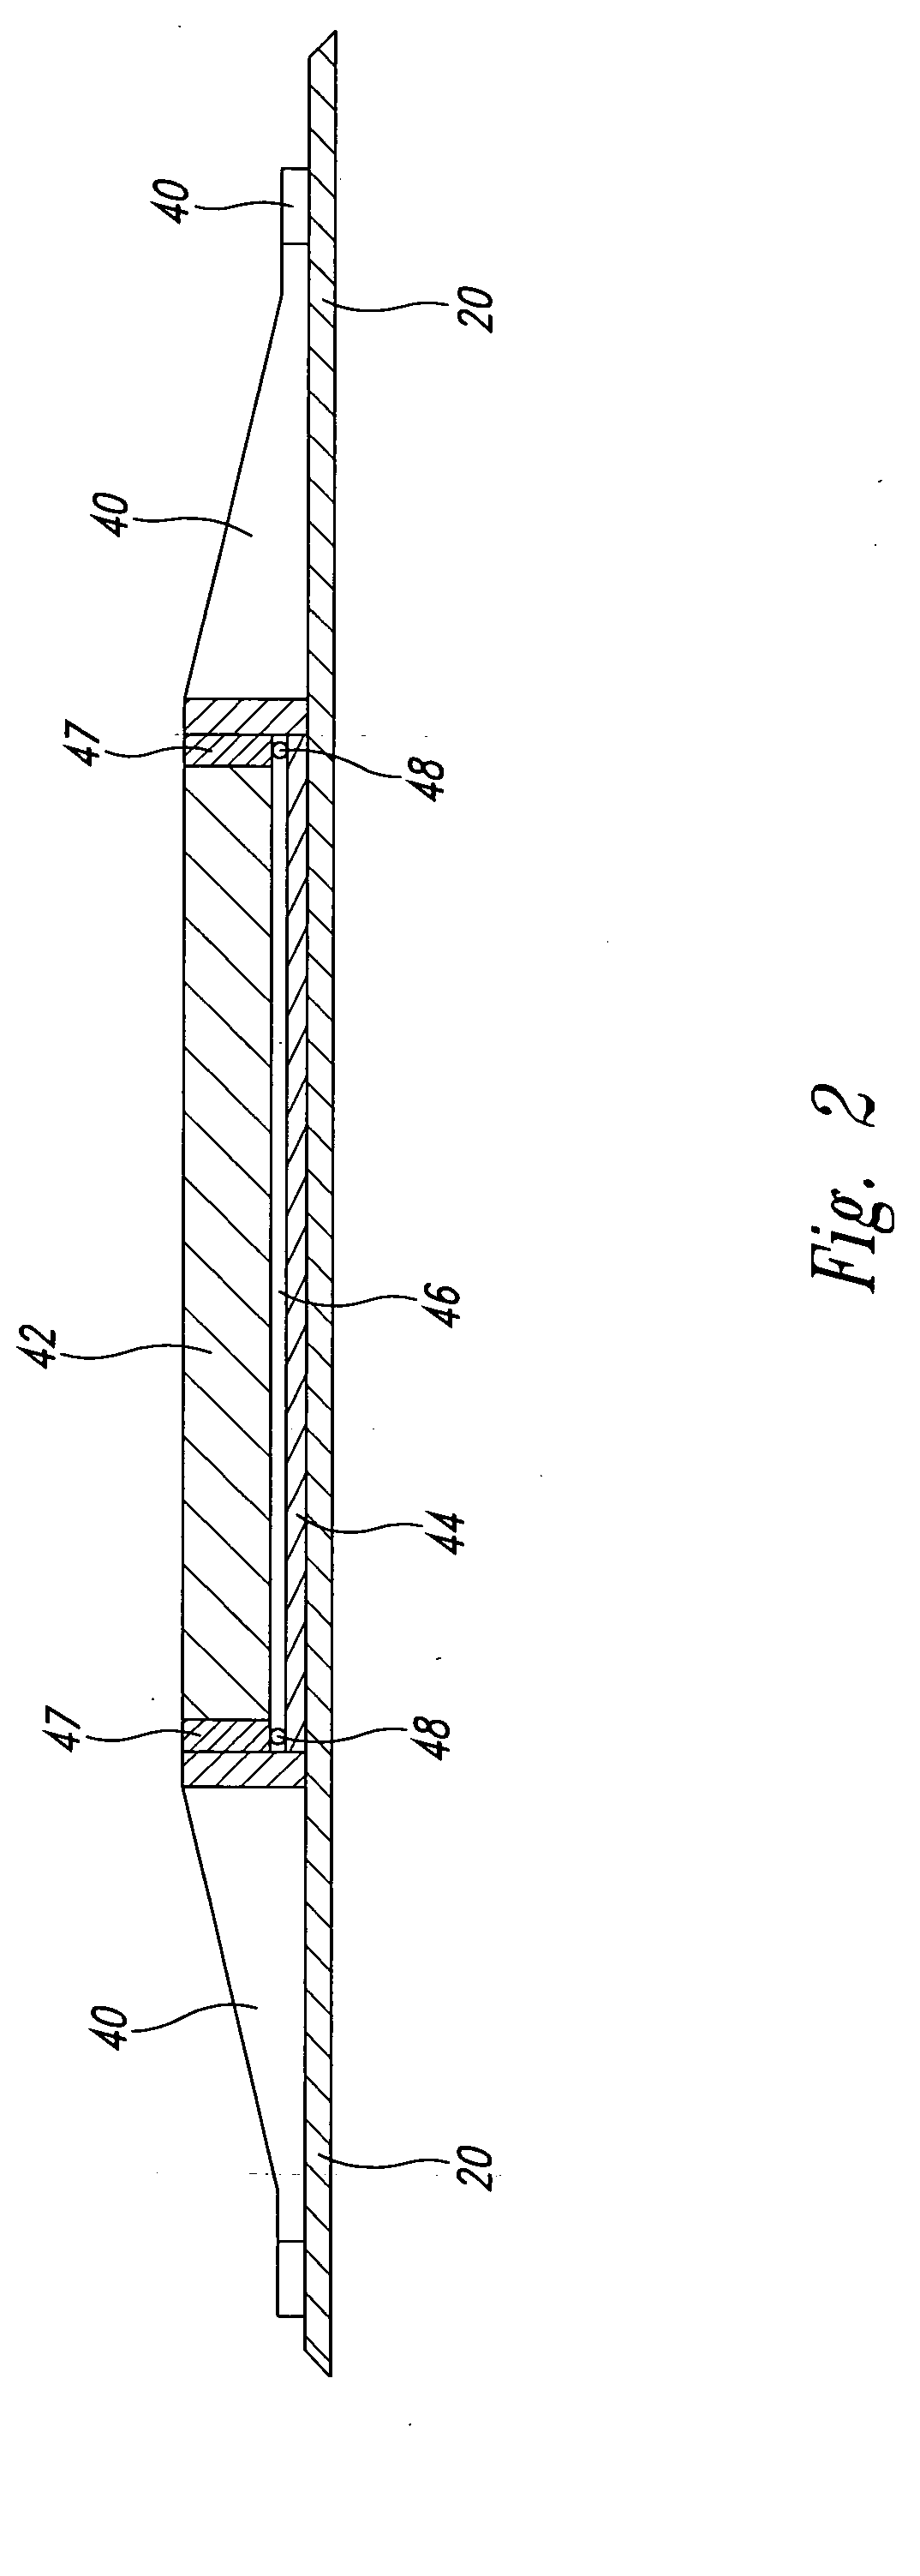 Method for use of external secondary payloads